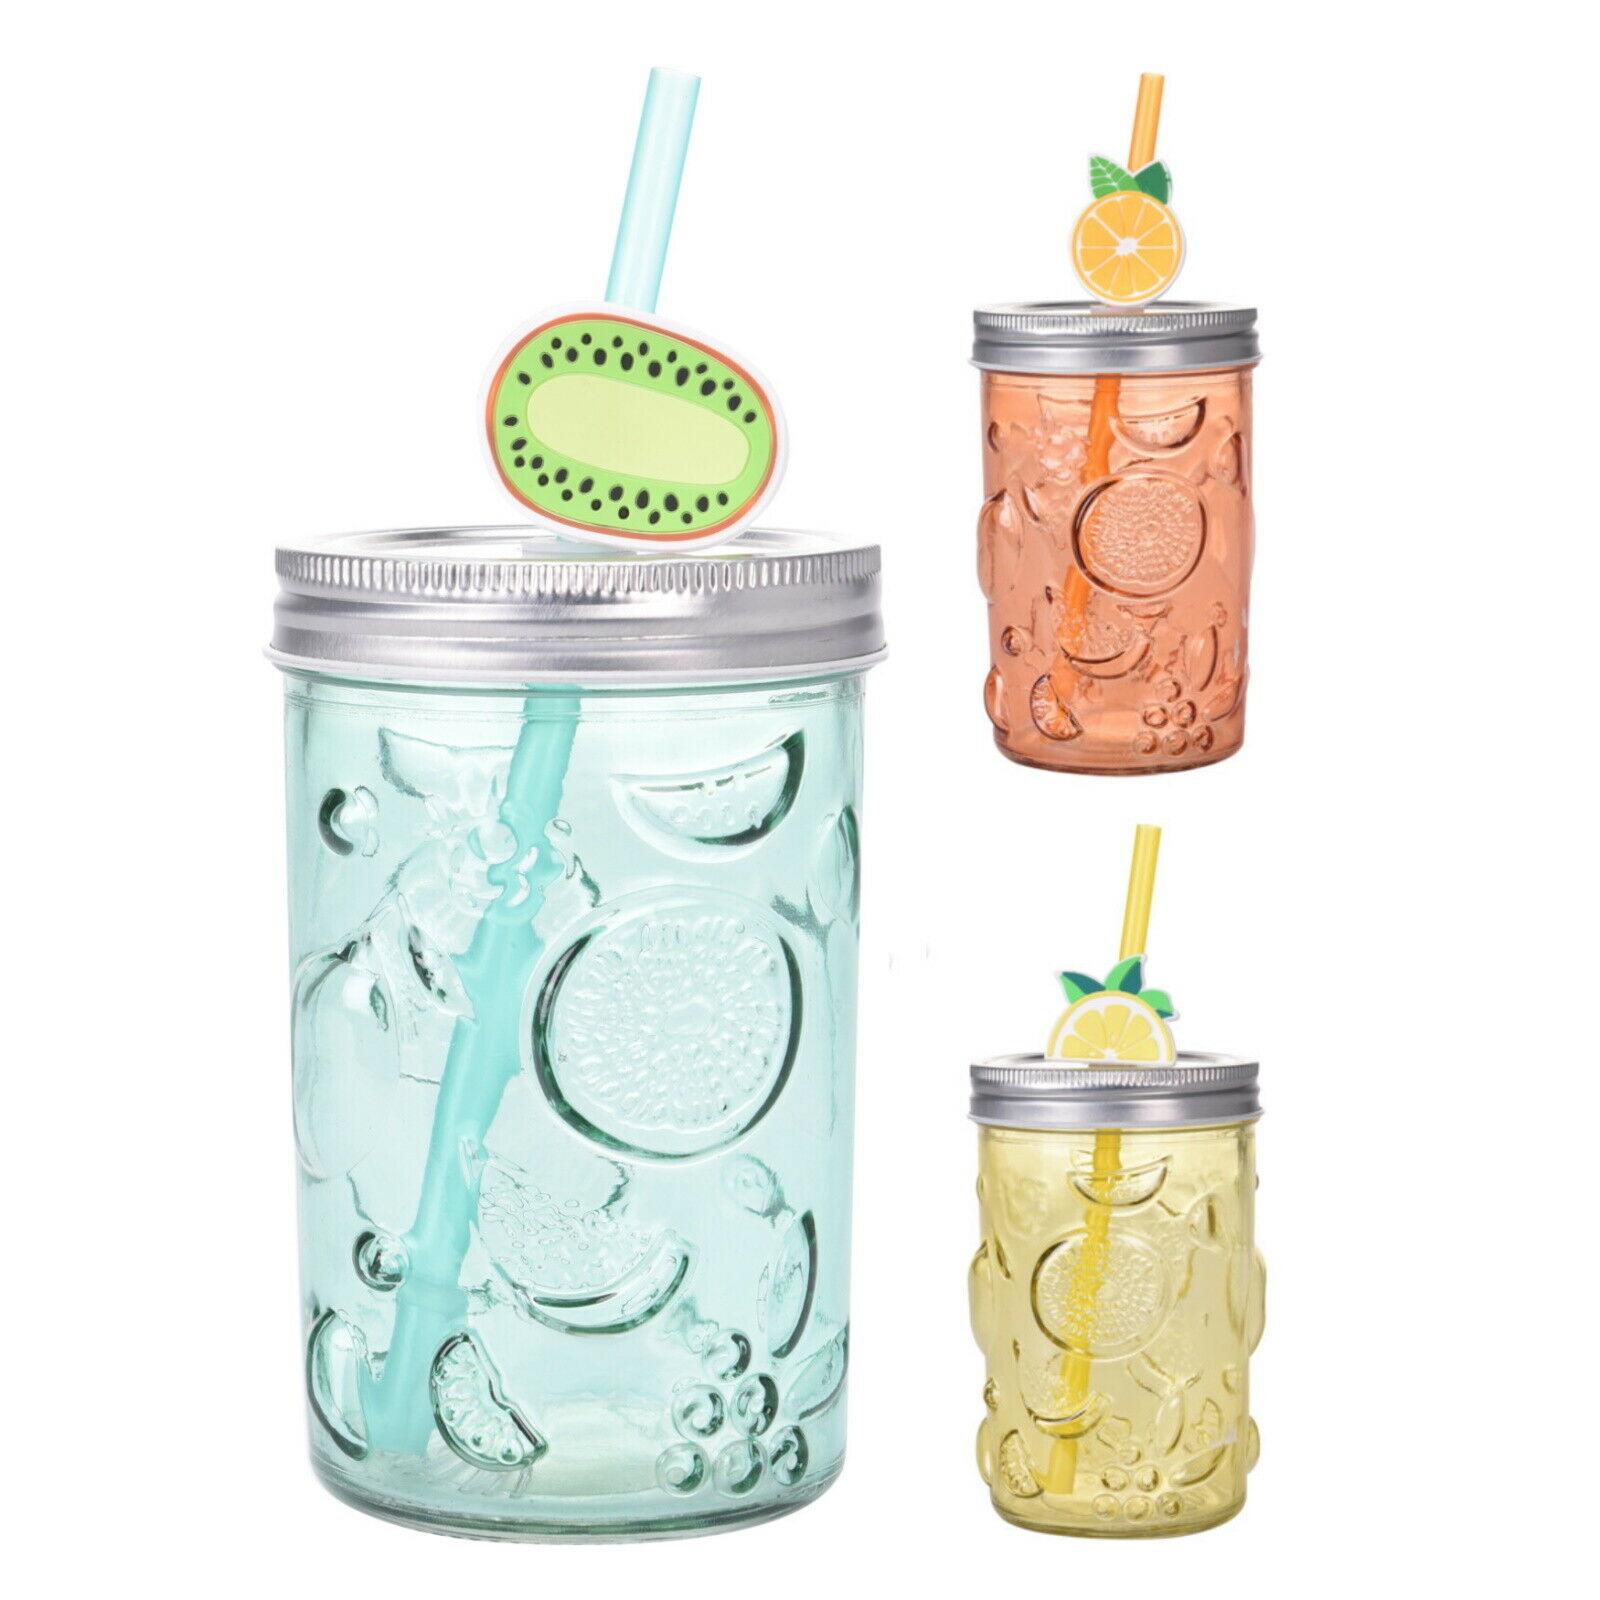 COCKTAIL JAM JAR GLASSES WITH HANDLE LID STRAW JUICE DRINK 500ML GLASS DRINKING